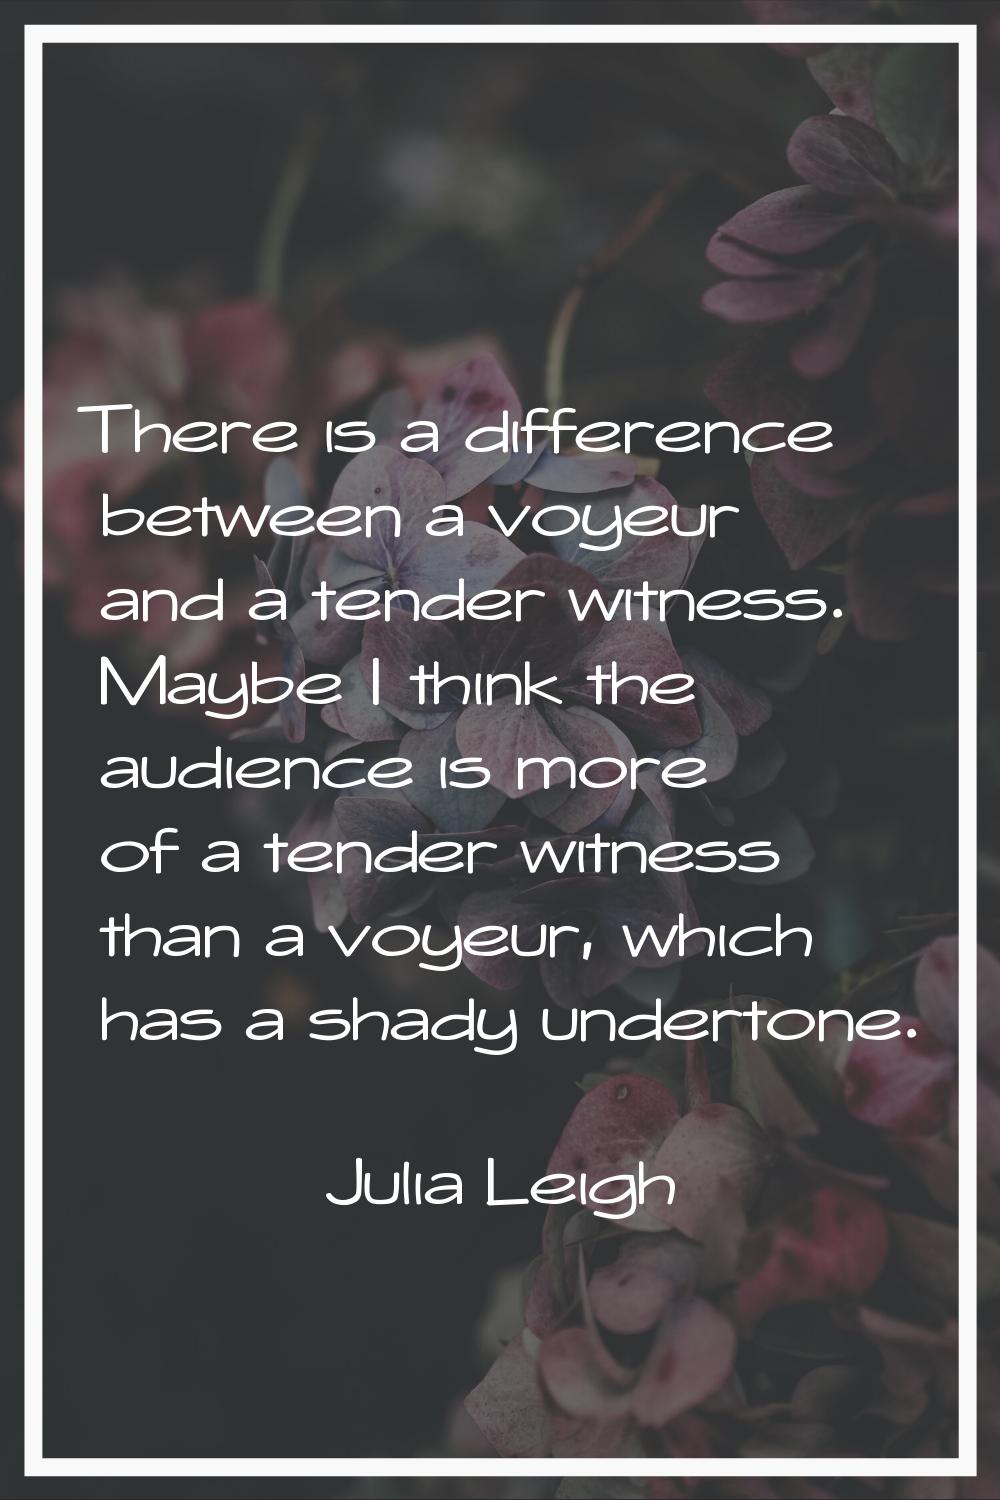 There is a difference between a voyeur and a tender witness. Maybe I think the audience is more of 